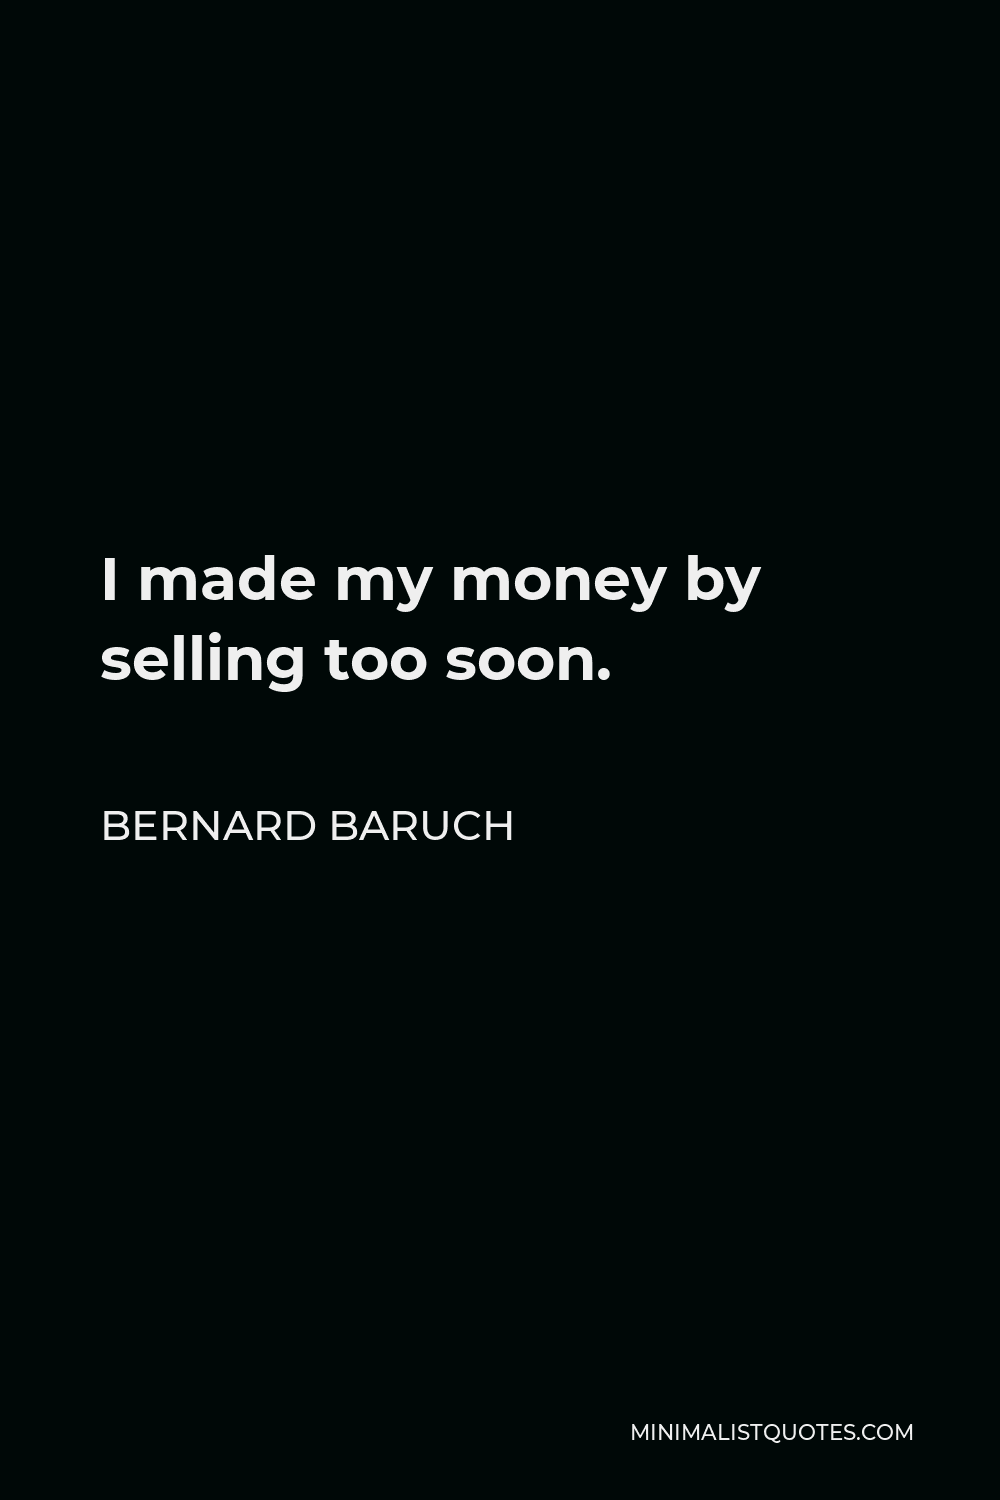 Bernard Baruch Quote - I made my money by selling too soon.